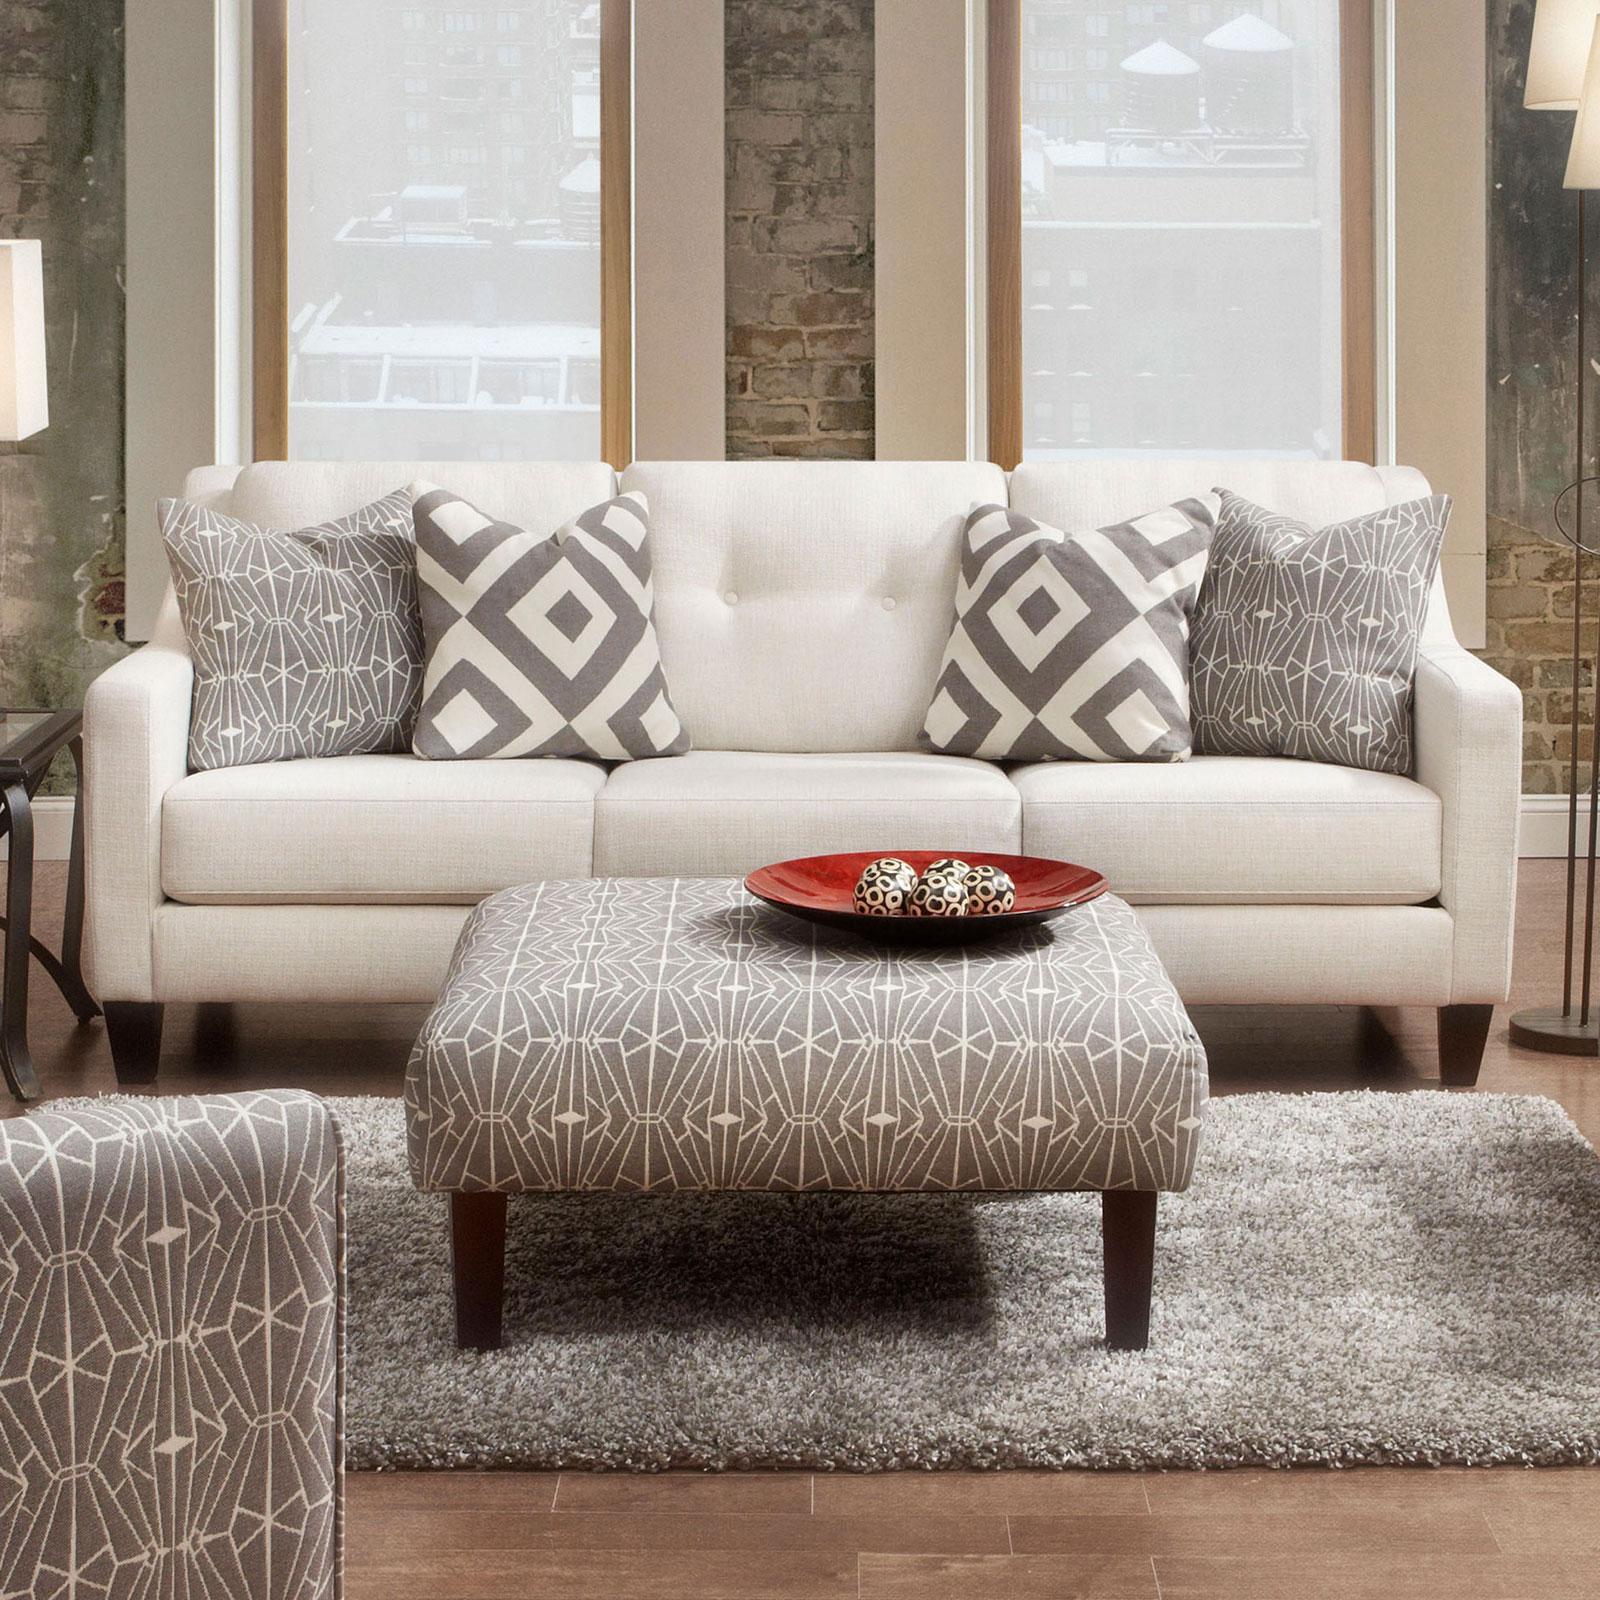 Transitional Sofa PARKER SM8563-SF SM8563-SF in Ivory Fabric